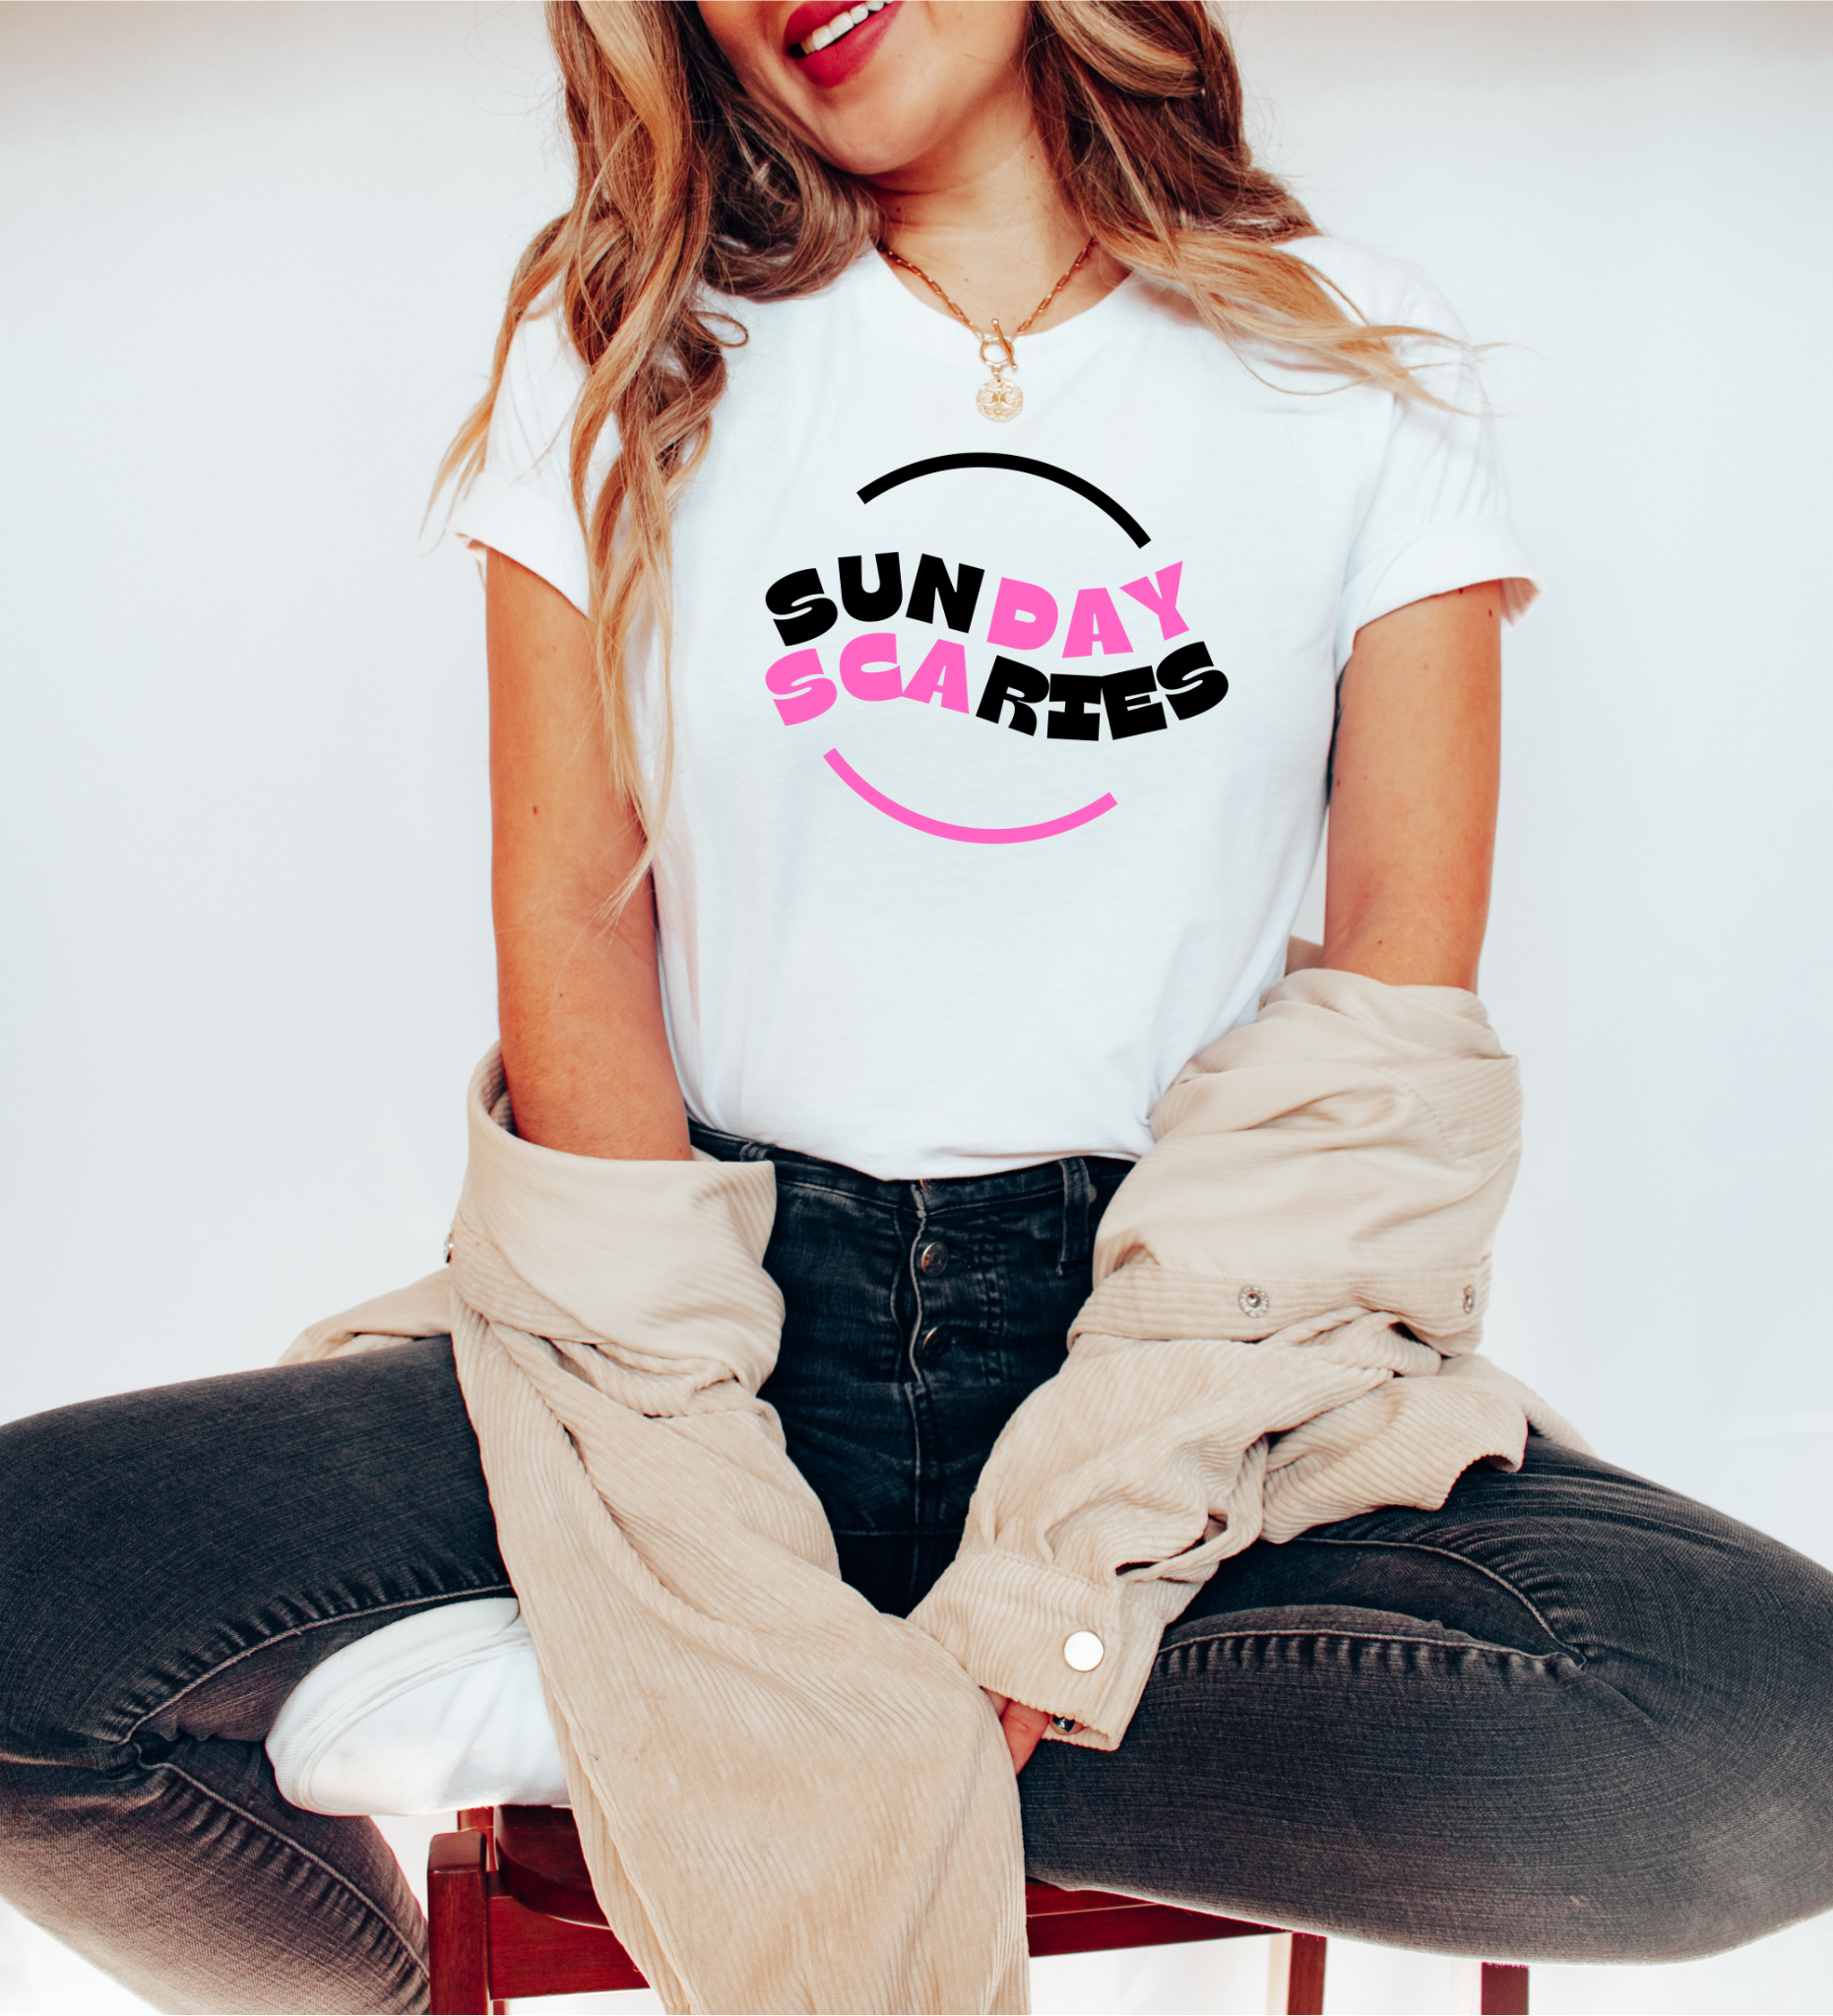 Sunday Scaries Funny Women's Graphic Tee